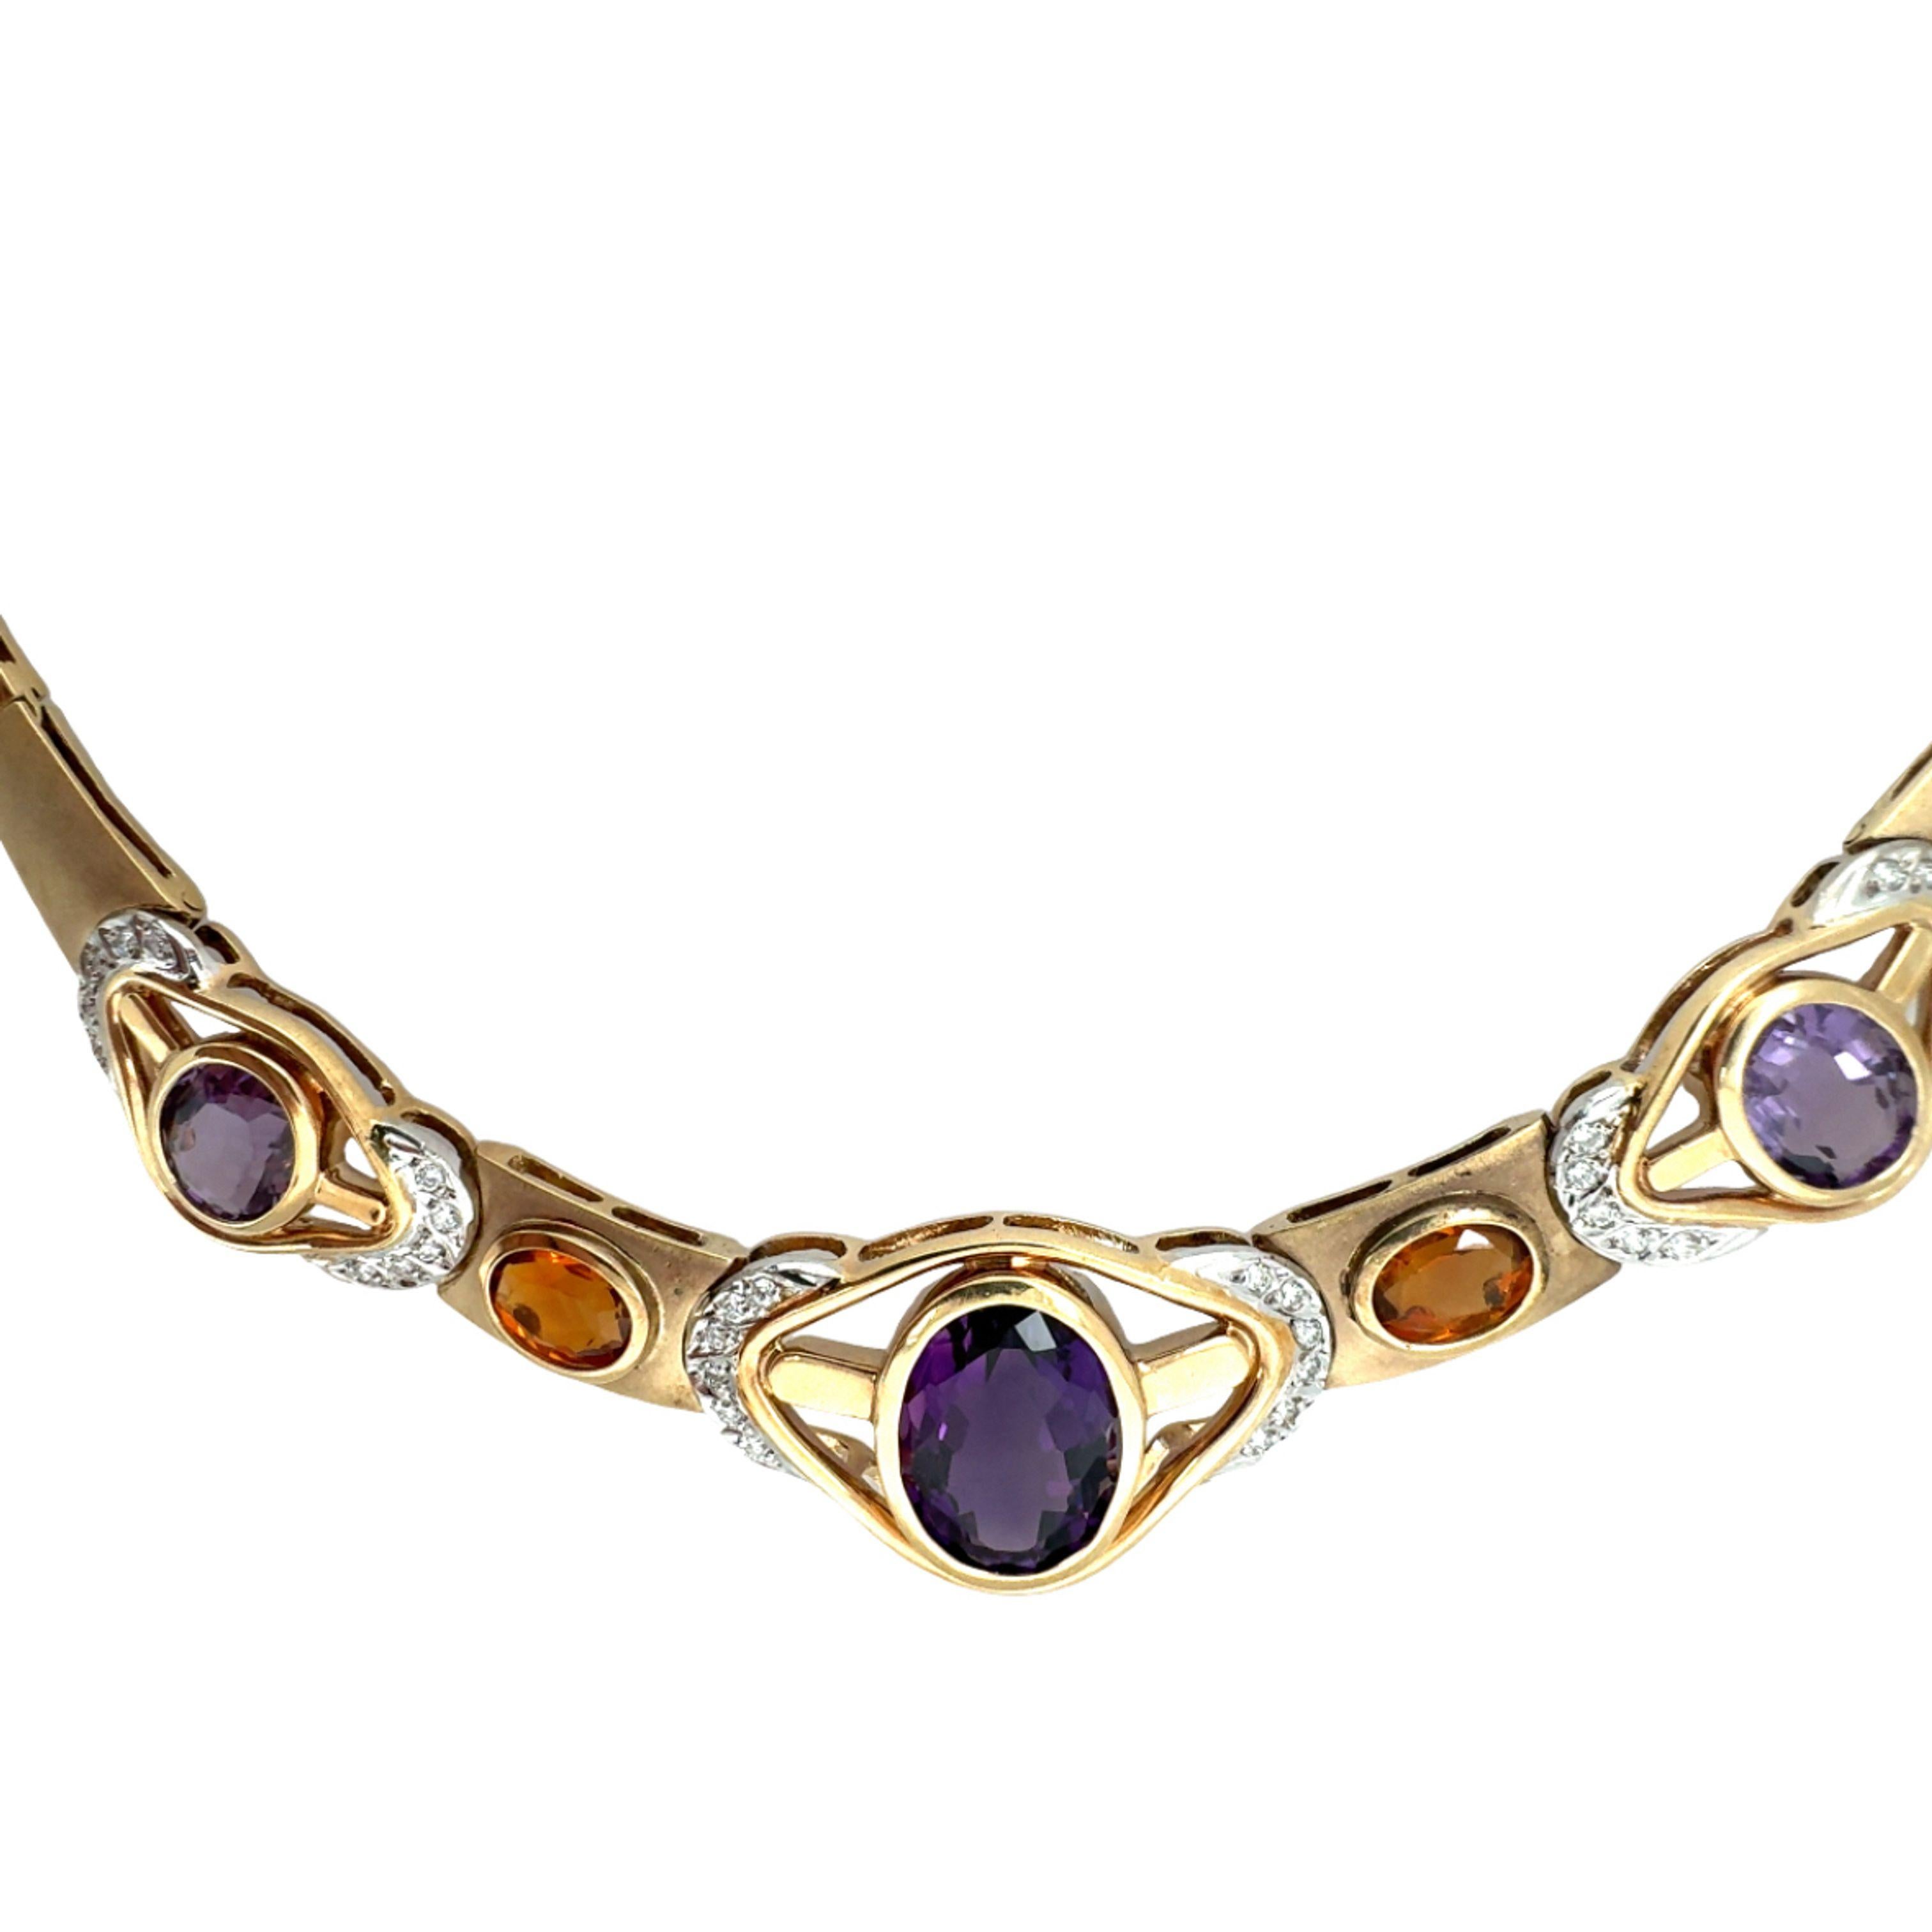 One multi-gem necklace in 14K yellow gold featuring three bezel set, oval brilliant cut amethysts with an approximate total weight of 7.28 ct. and two bezel set, oval brilliant cut citrines with an approximate total weight of 1.42 ct. Accented by